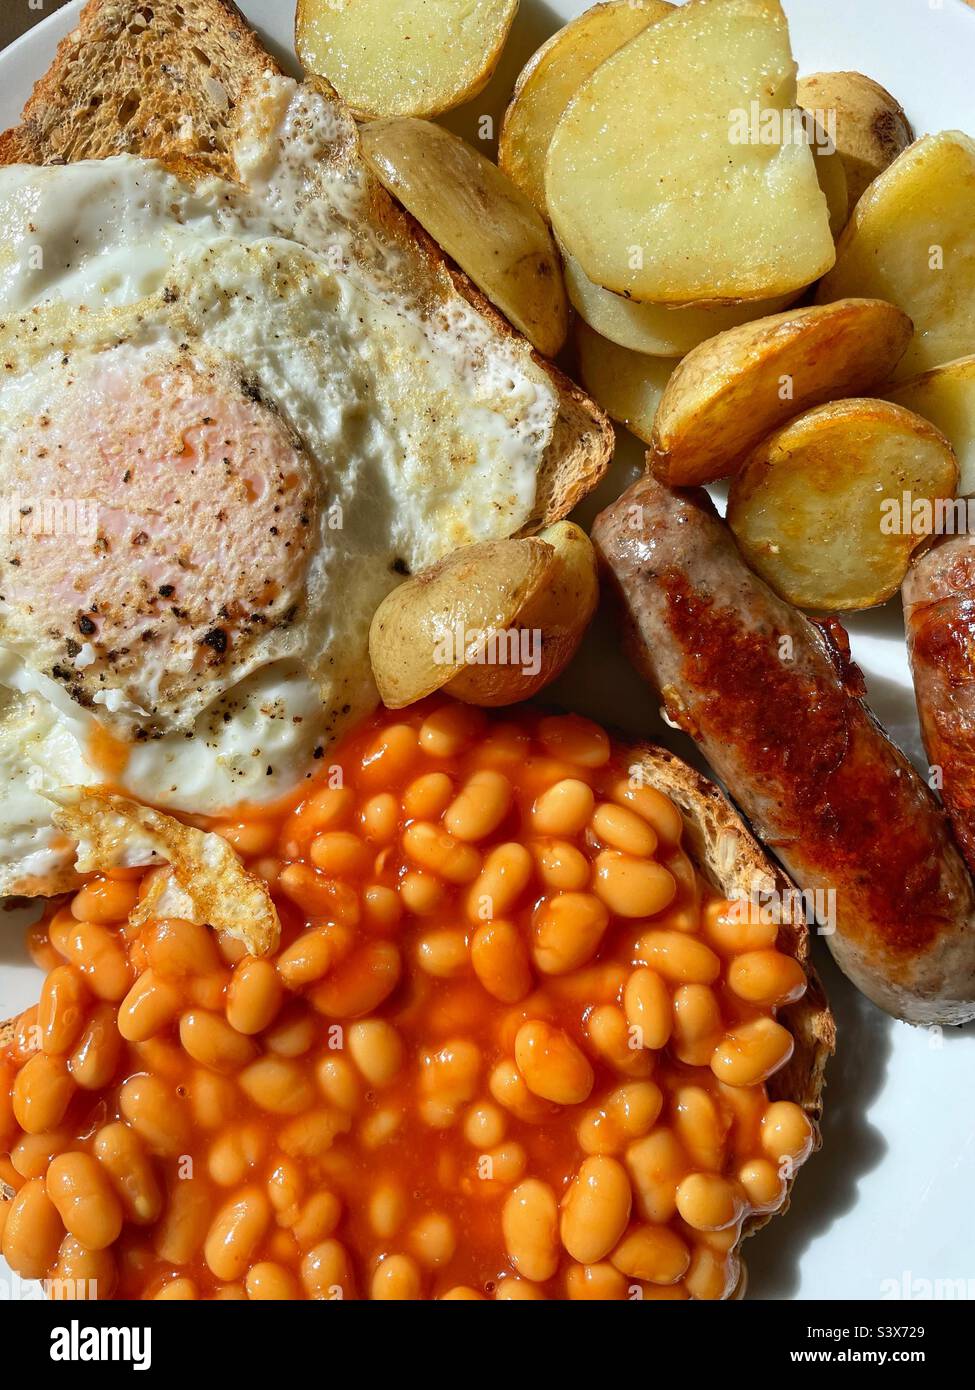 Brunch - fried potatoes, fried eggs, sausages and beans. Stock Photo